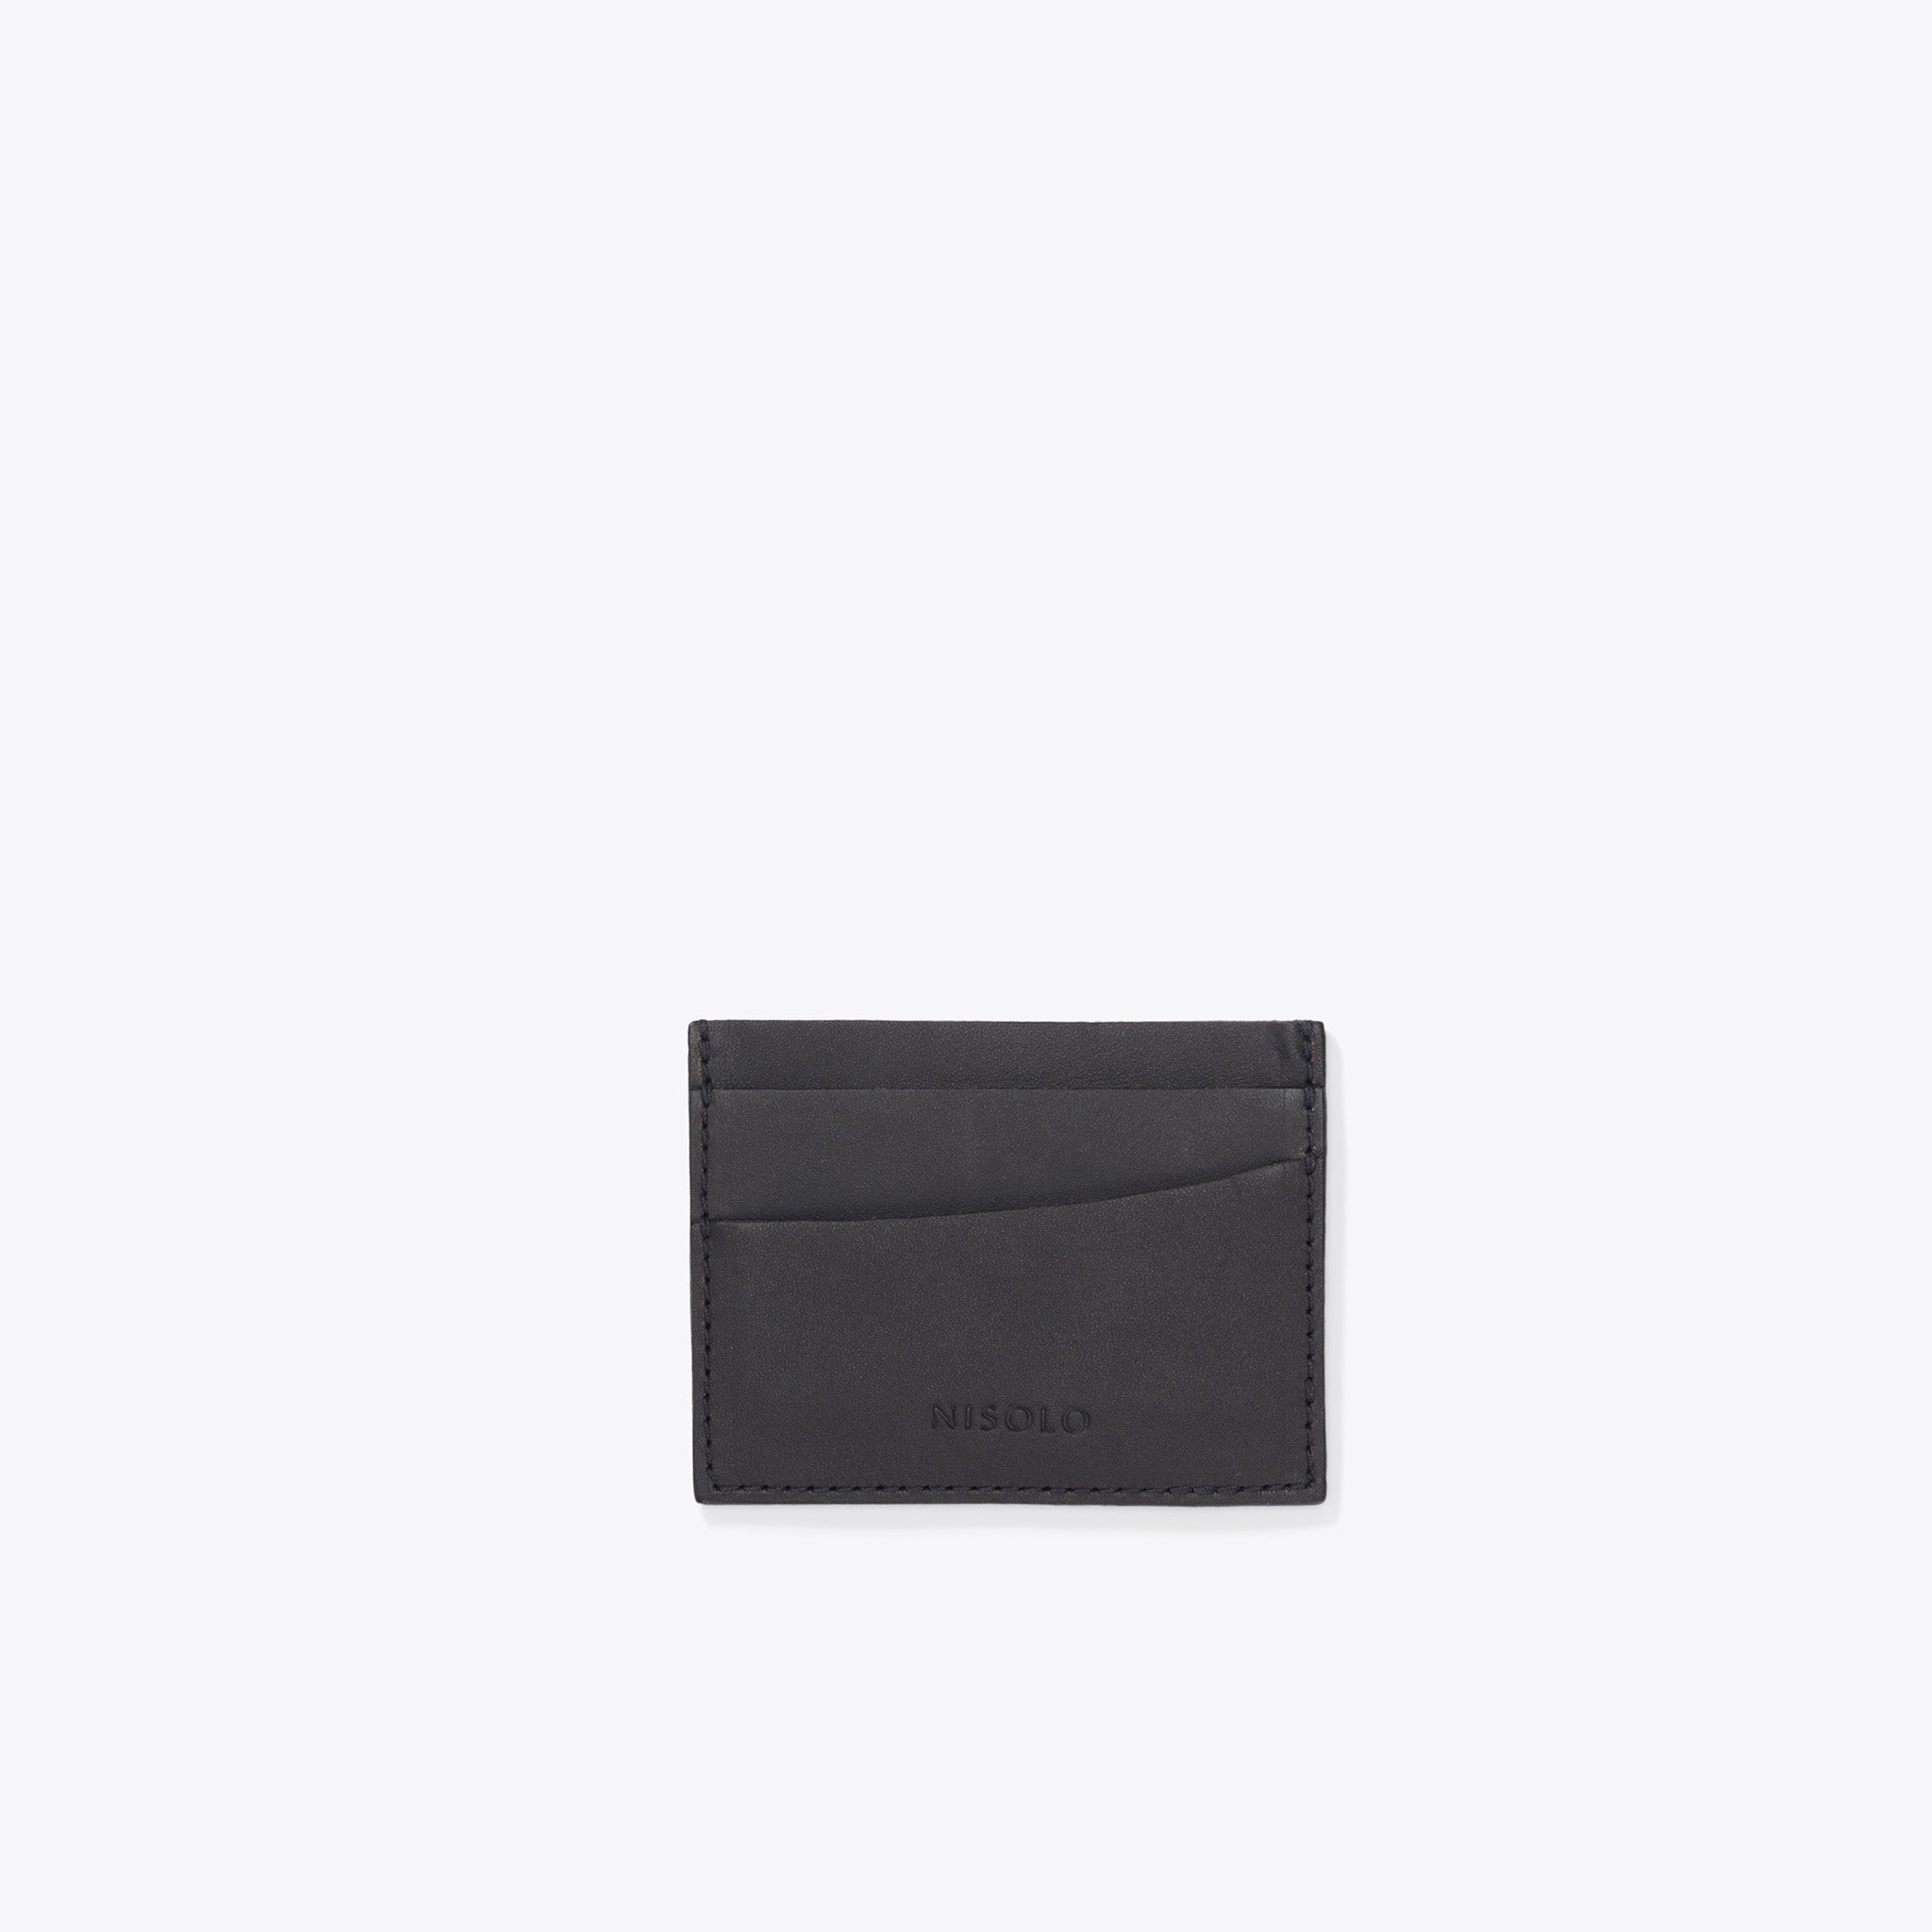 Upcycled Leather Card Case Black Leather Card Case Nisolo 